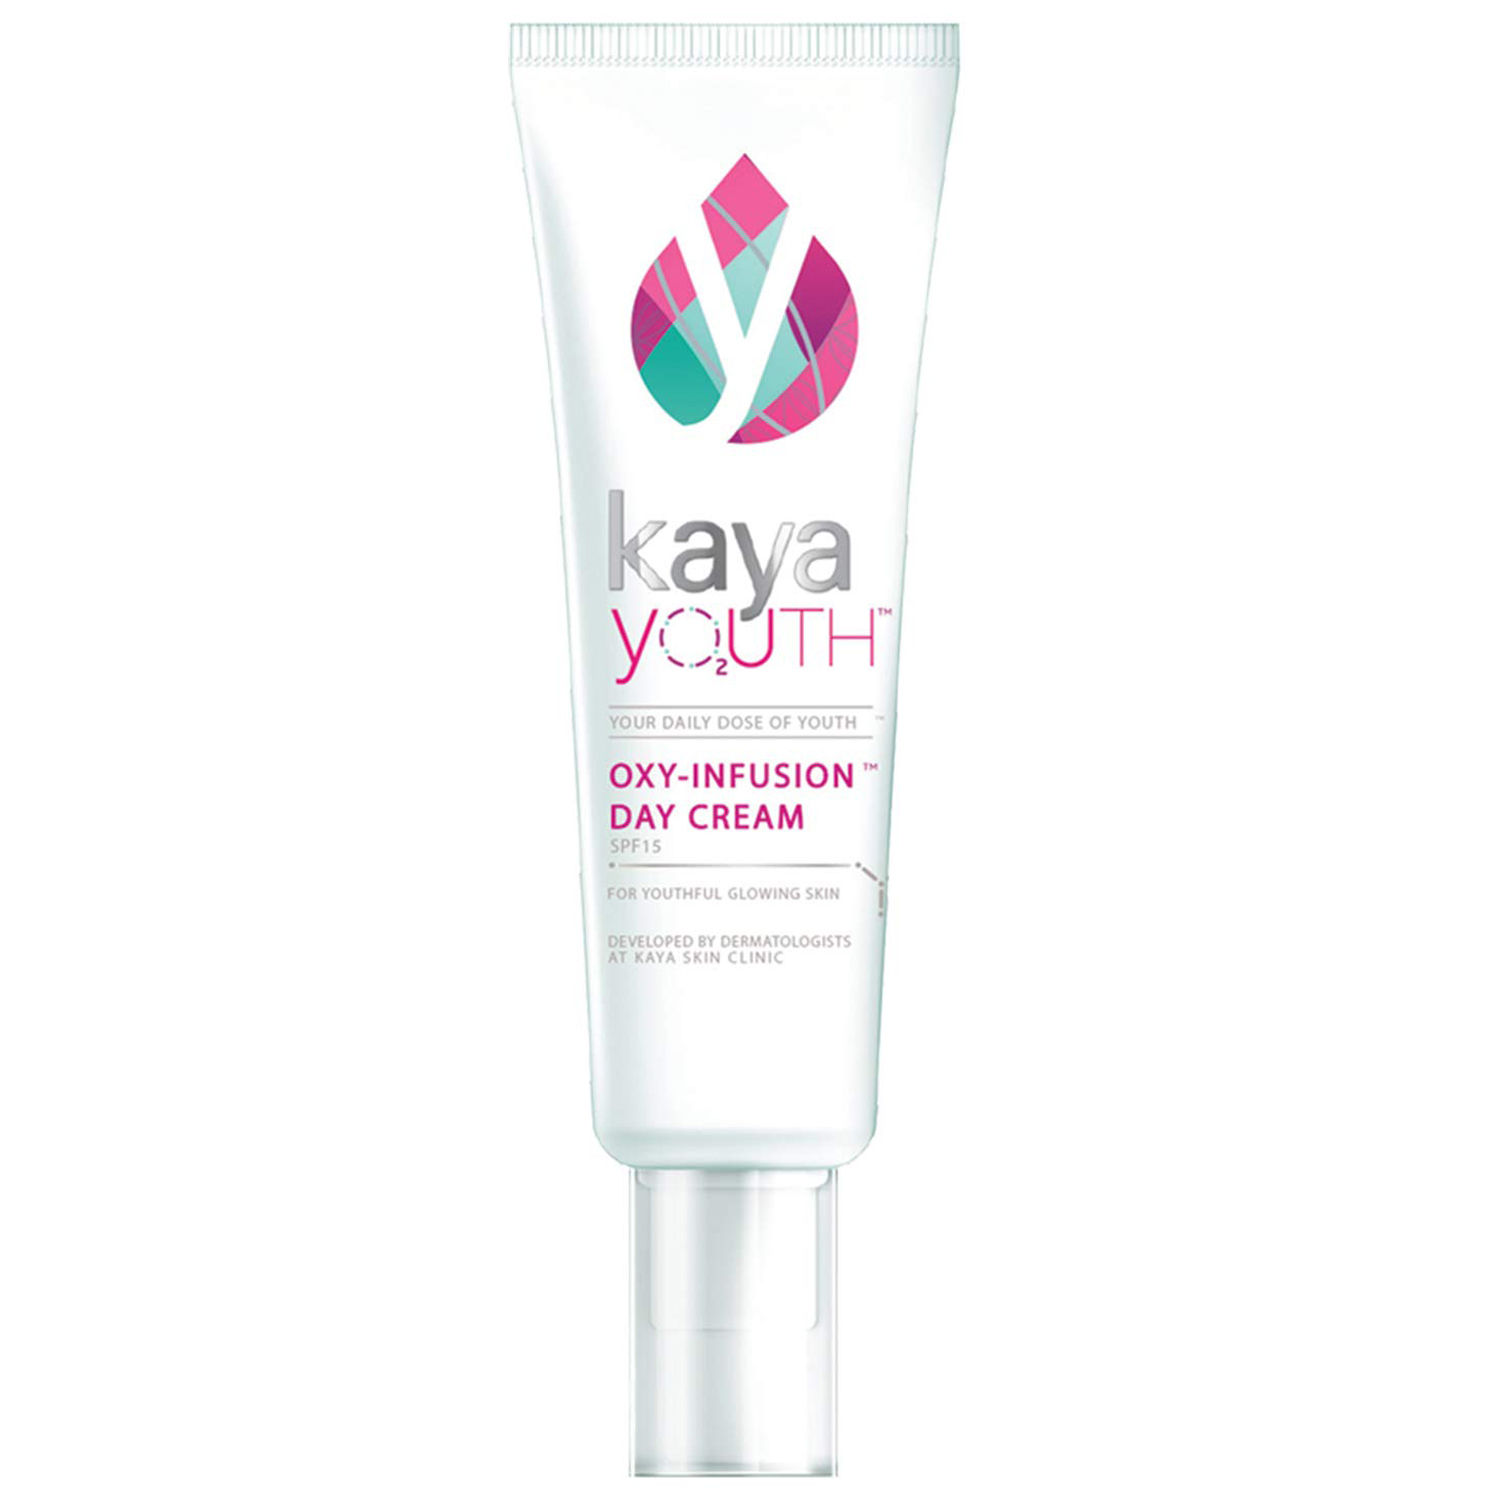 Kaya Youth Oxy-Infusion Day Cream SPF 15, 50 gm, Pack of 1 